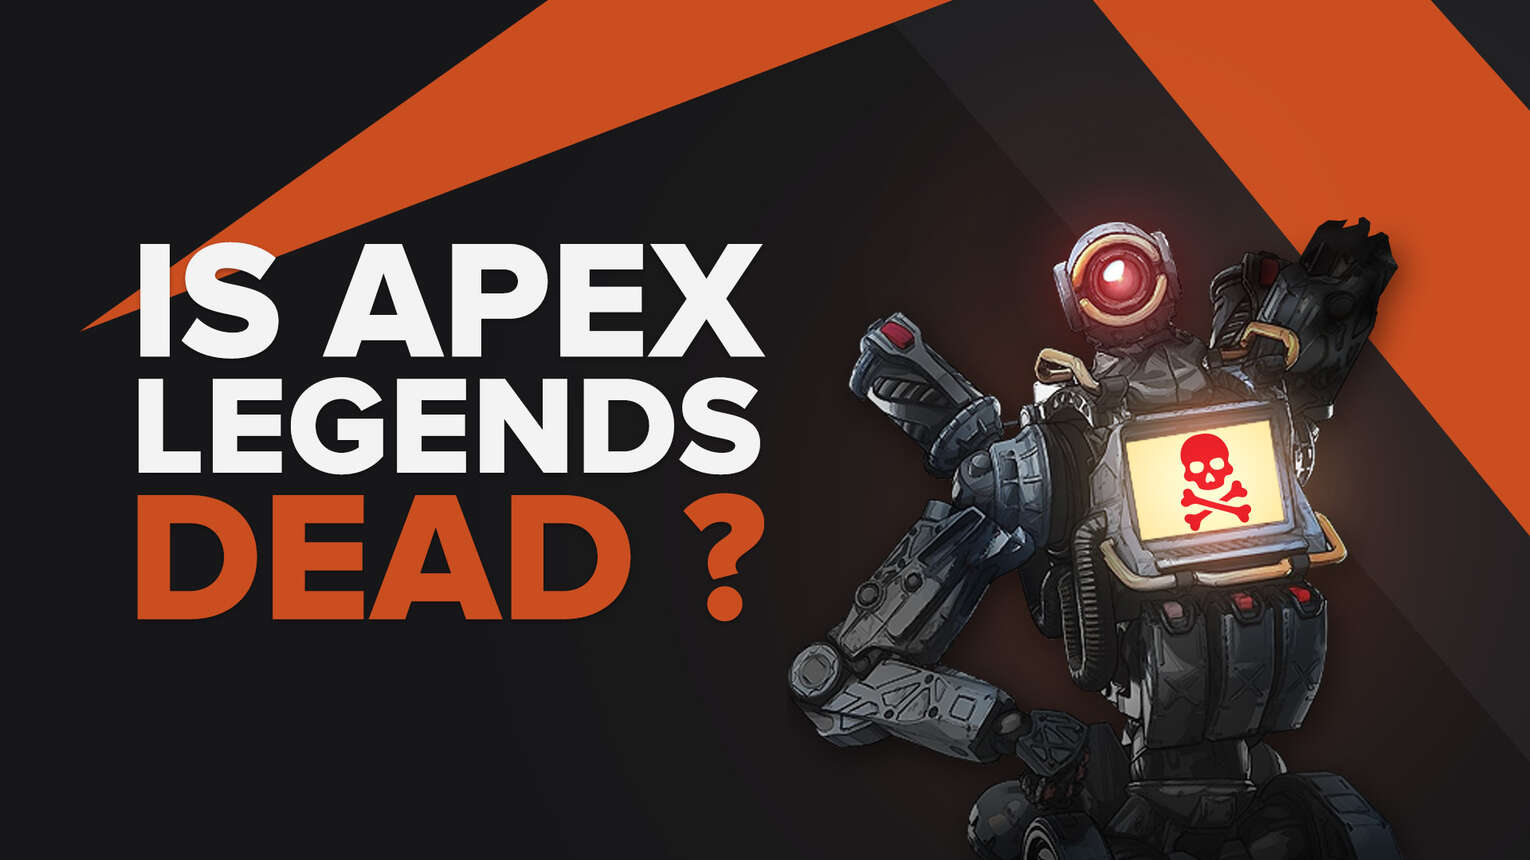 Is Apex Legends dying in popularity? (2023 Update)